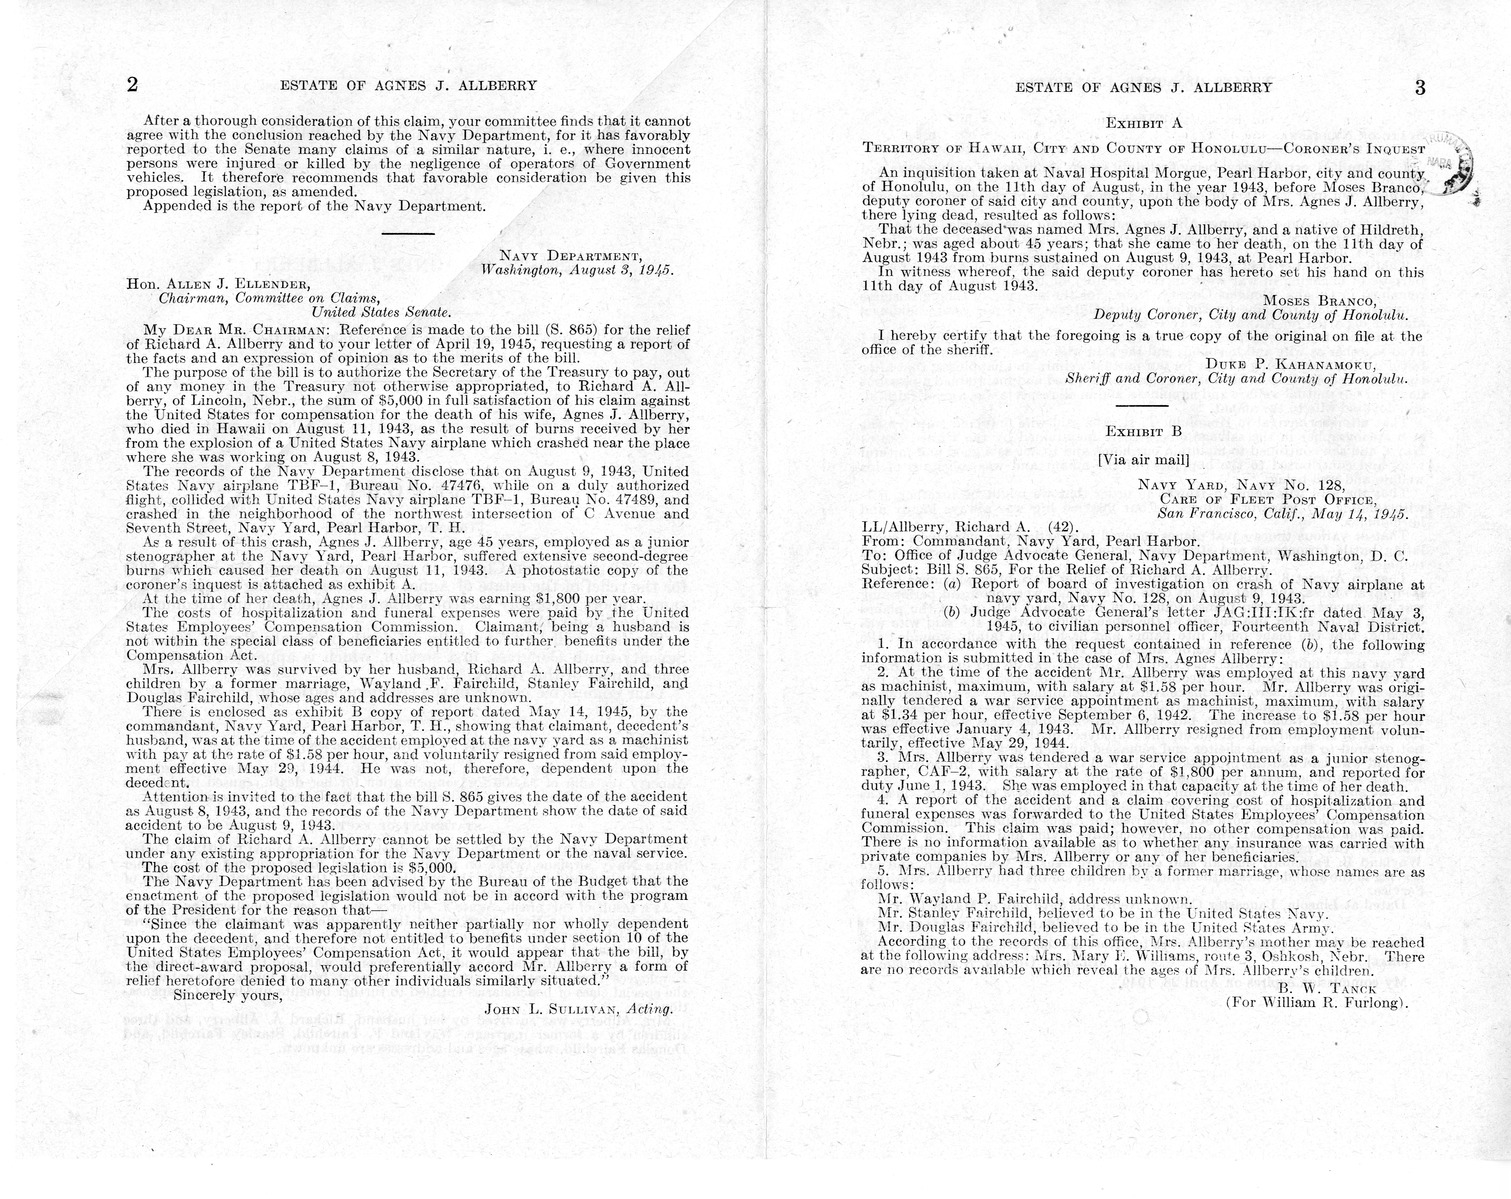 Memorandum from Harold D. Smith to M. C. Latta, S. 865, For the Relief of the Estate of Agnes J. Allberry, with Attachments